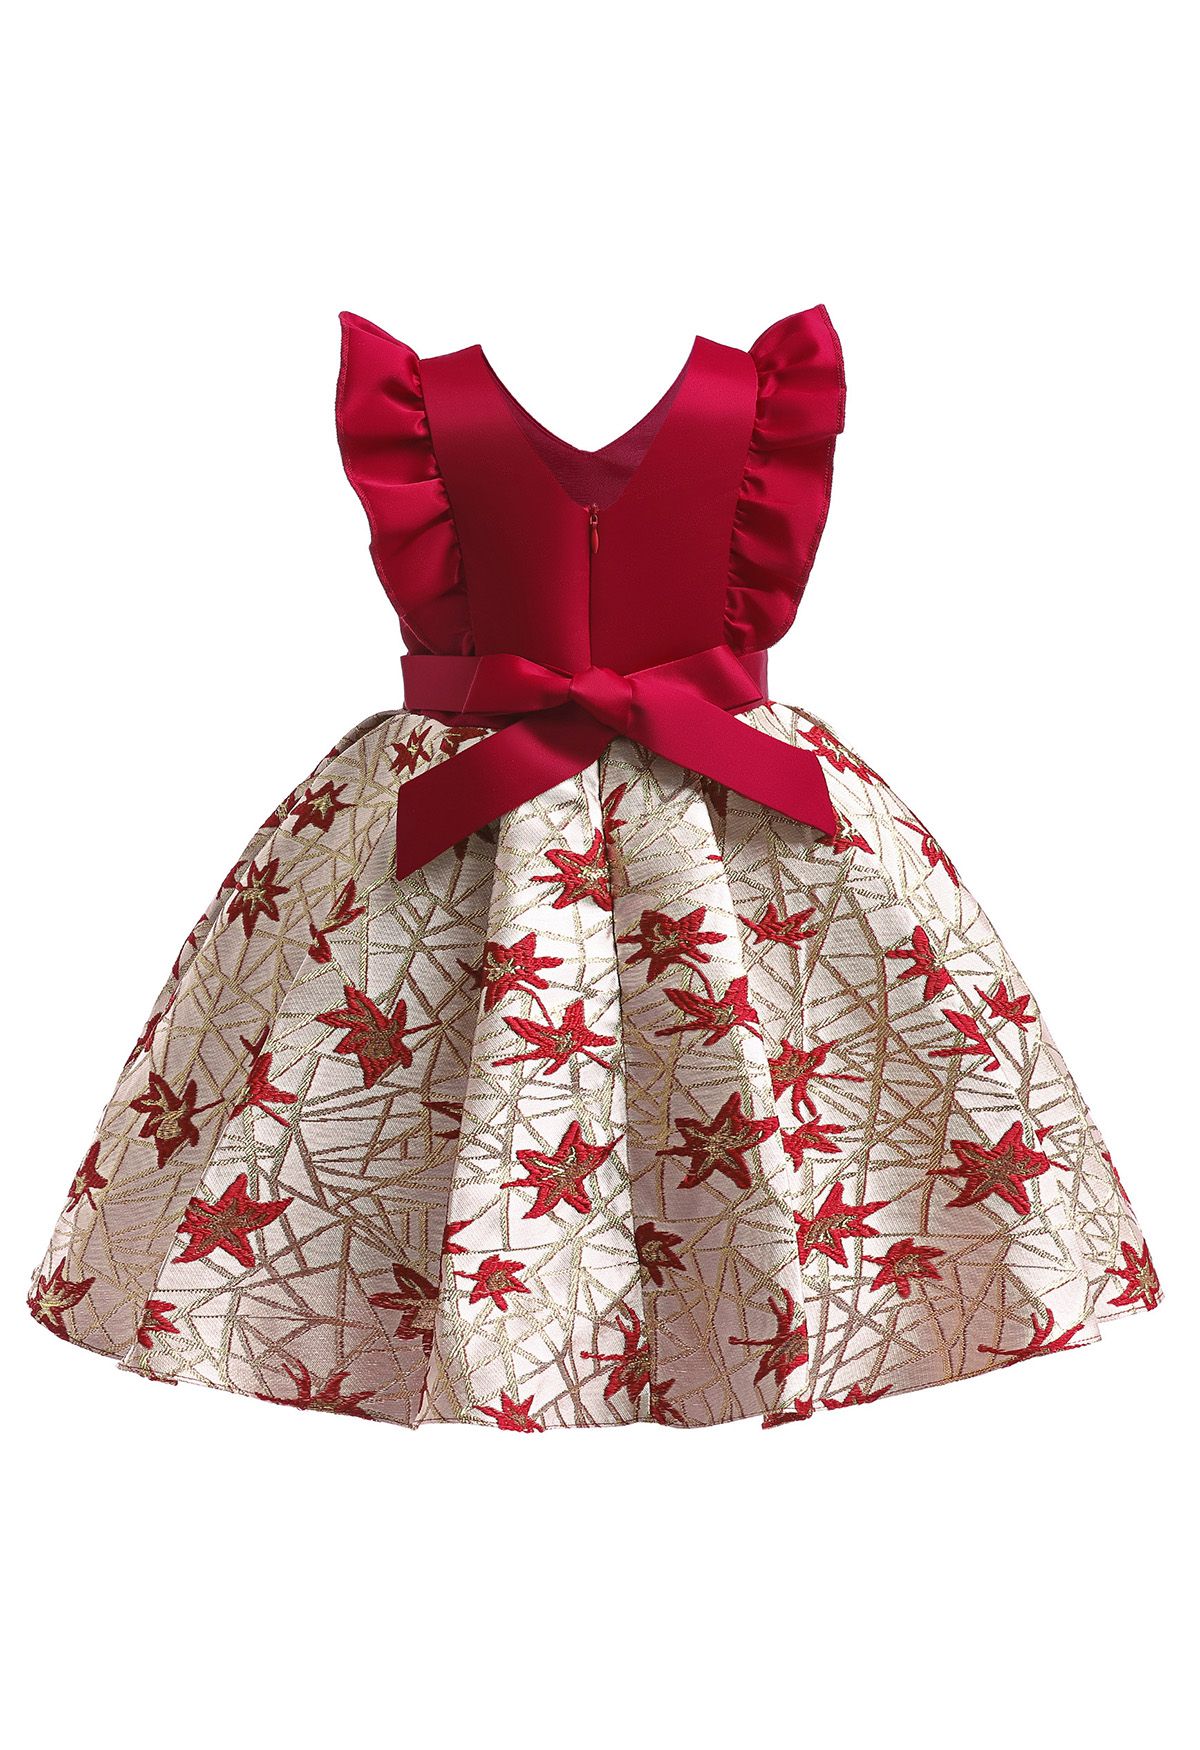 Girls' Jacquard Leaf Ruffle Bowknot Pleated Dress in Red